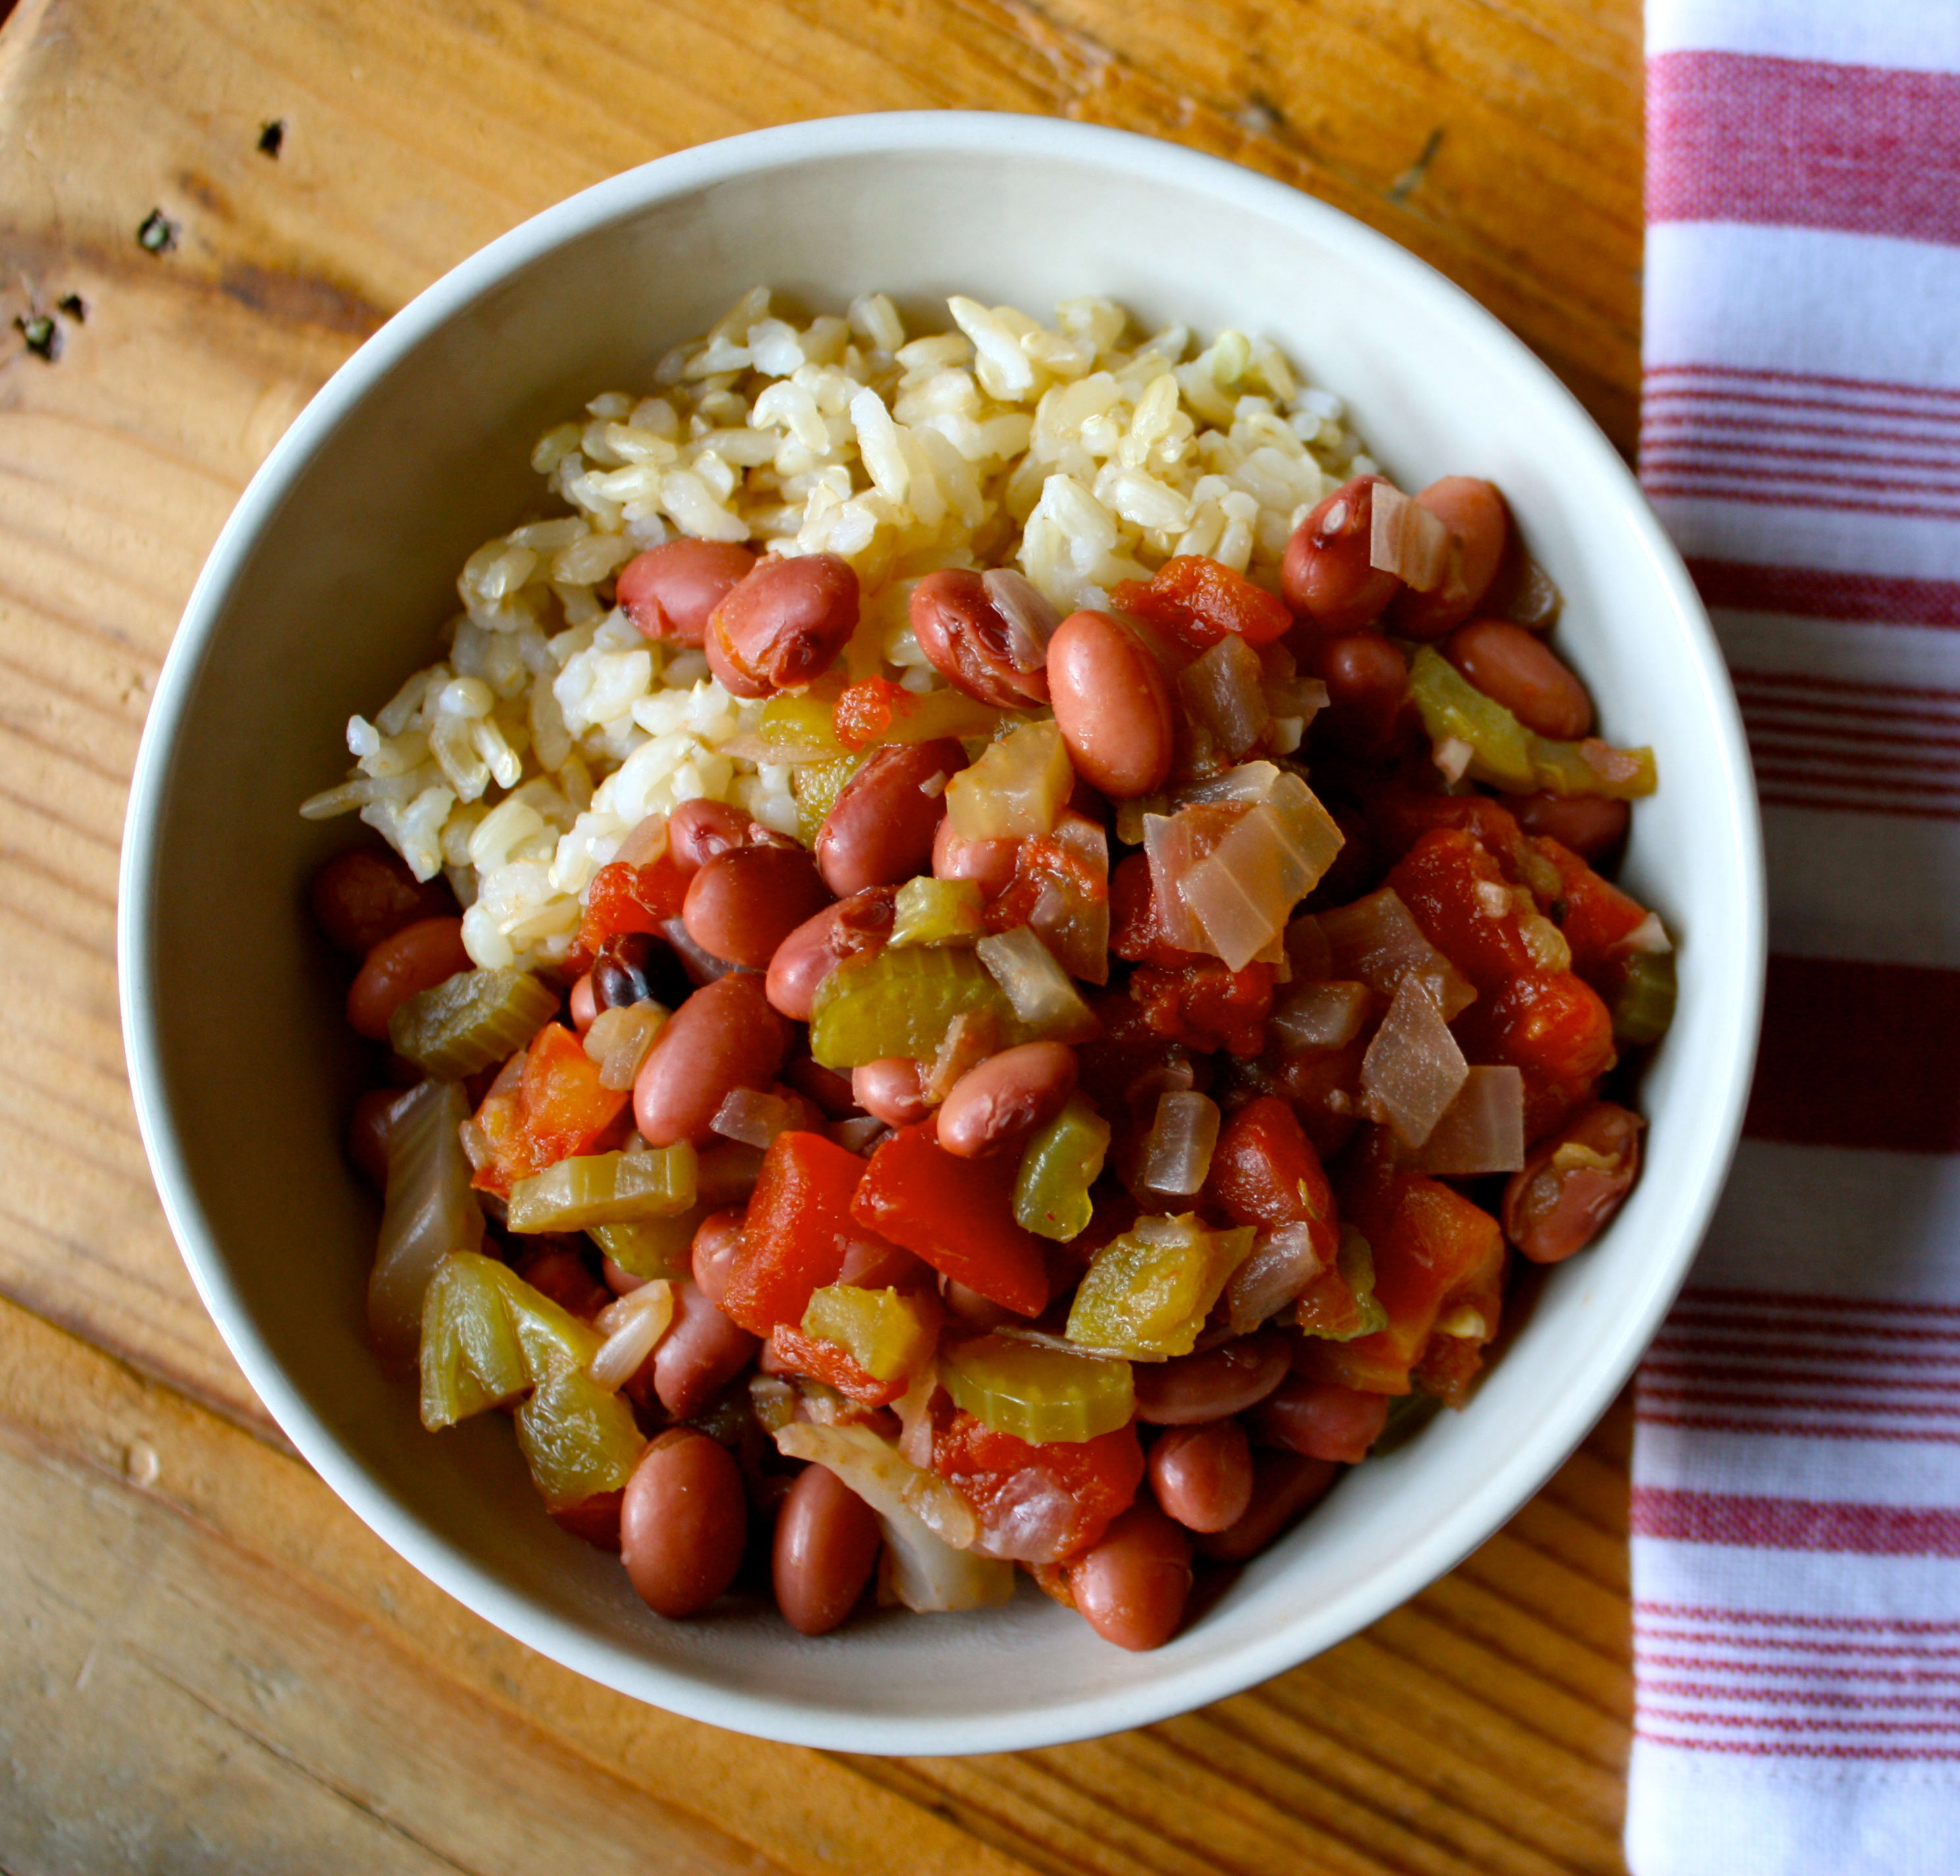 Easy Slow Cooker Recipes: Savory Slow Cooker Beans with Rice